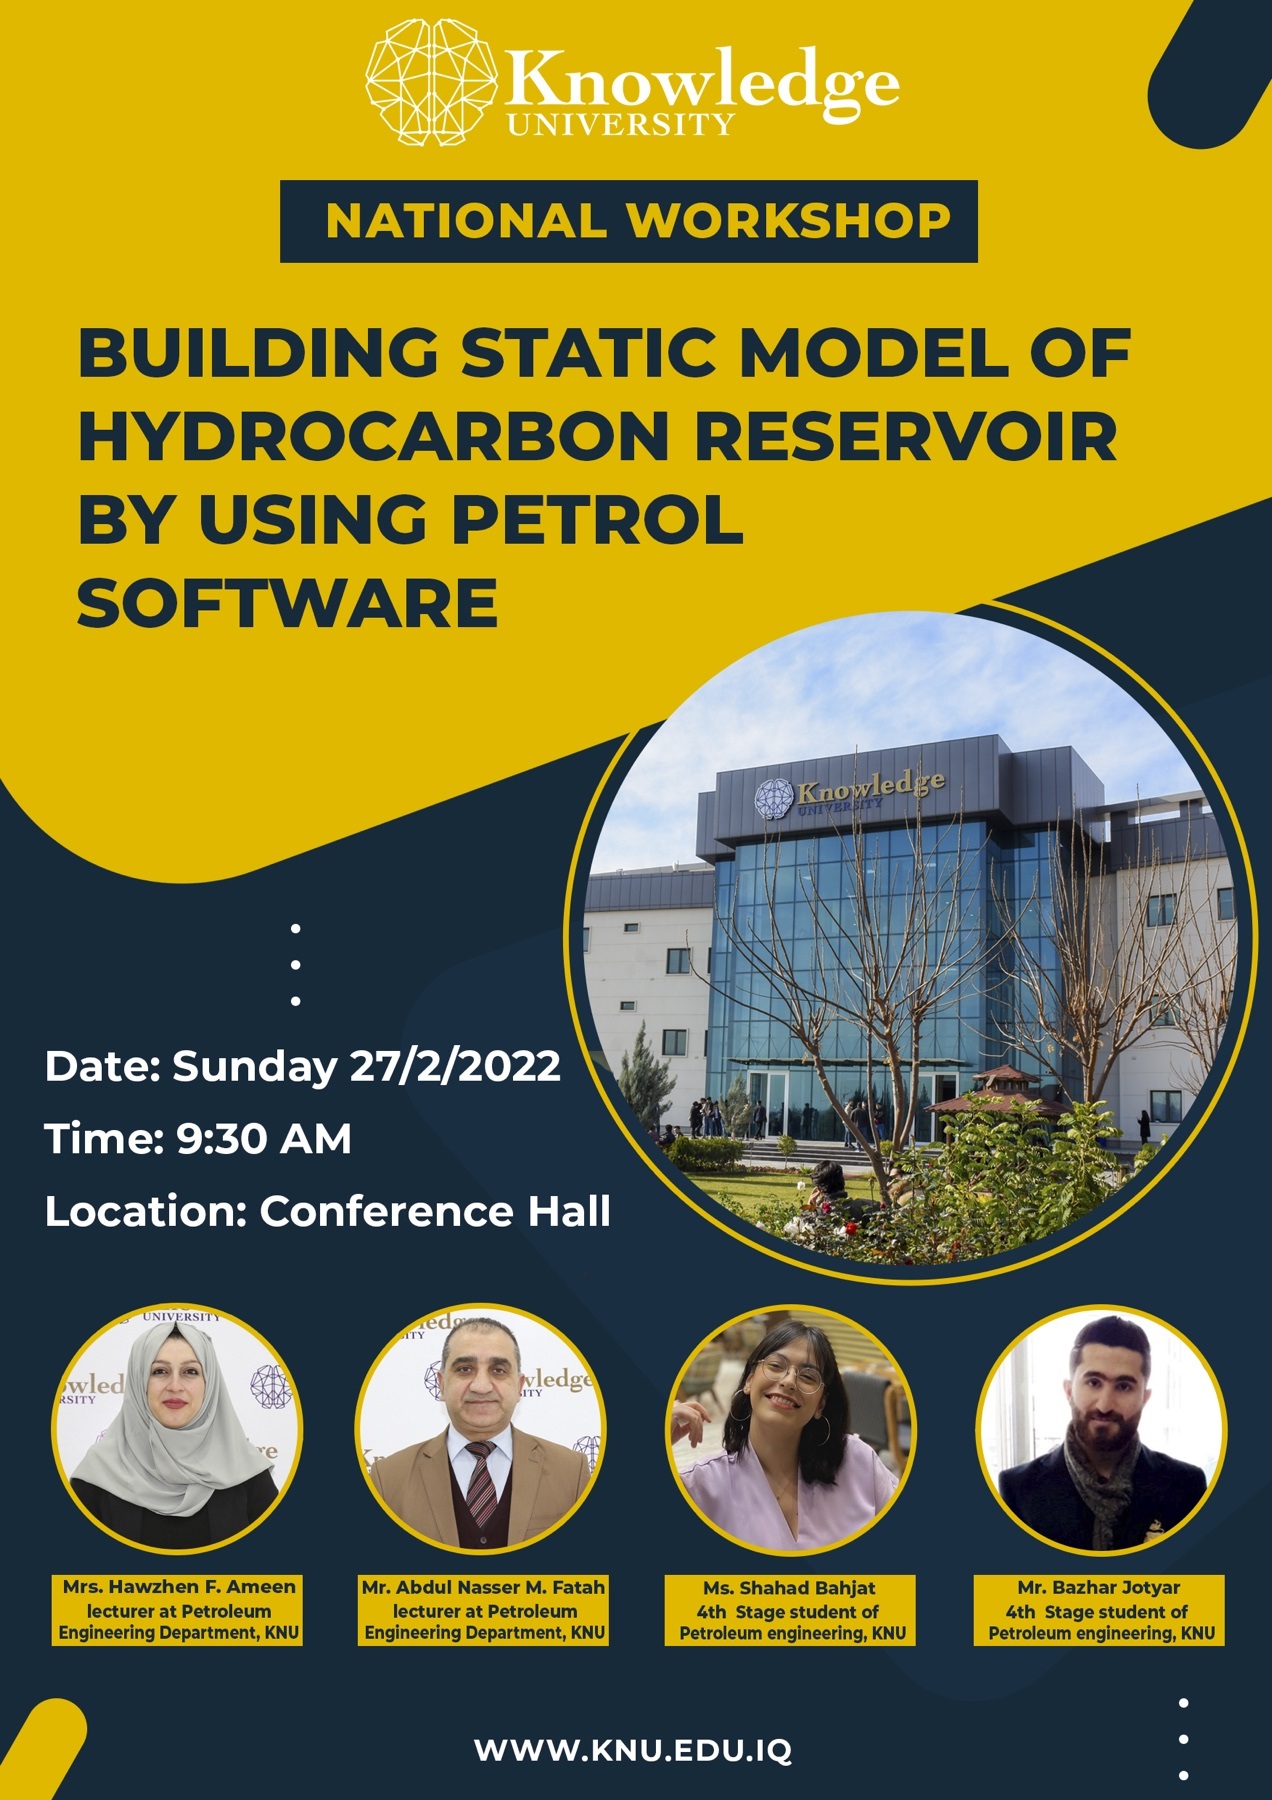 Building Static Model of Hydrocarbon Reservoir by Using Petrol Software